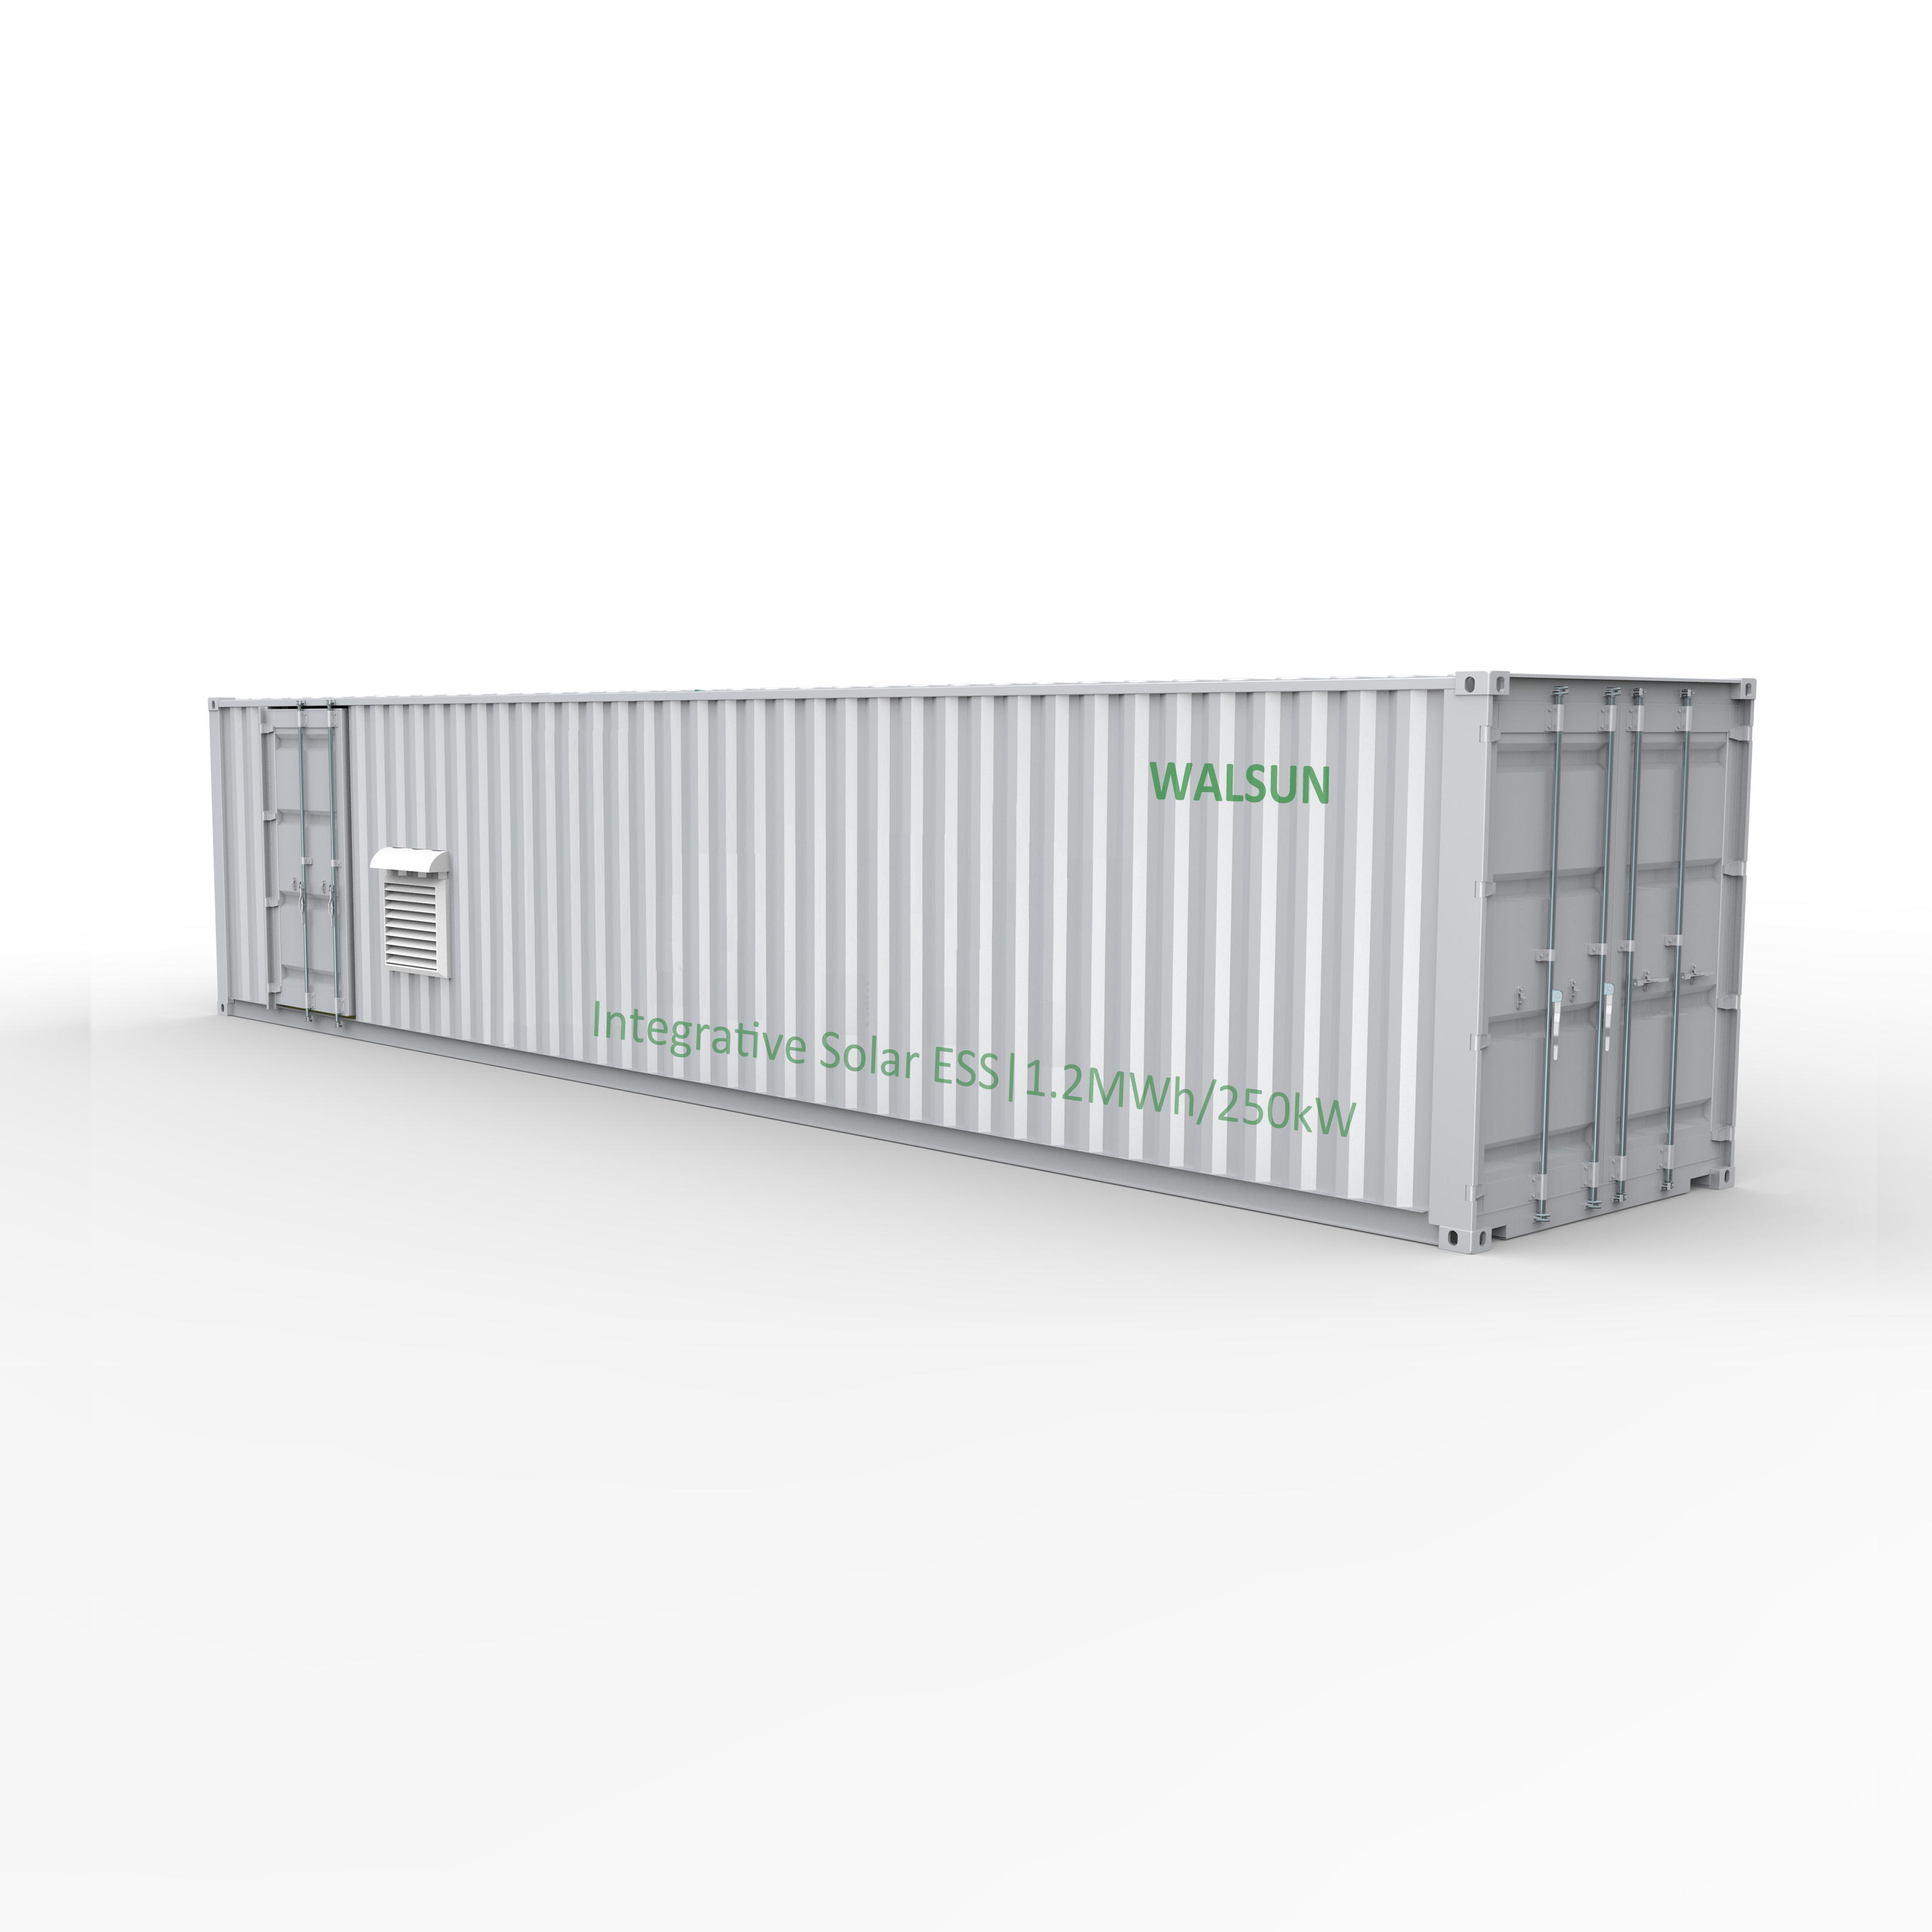 Containerized Solar ESS 1.2MWh/250kW